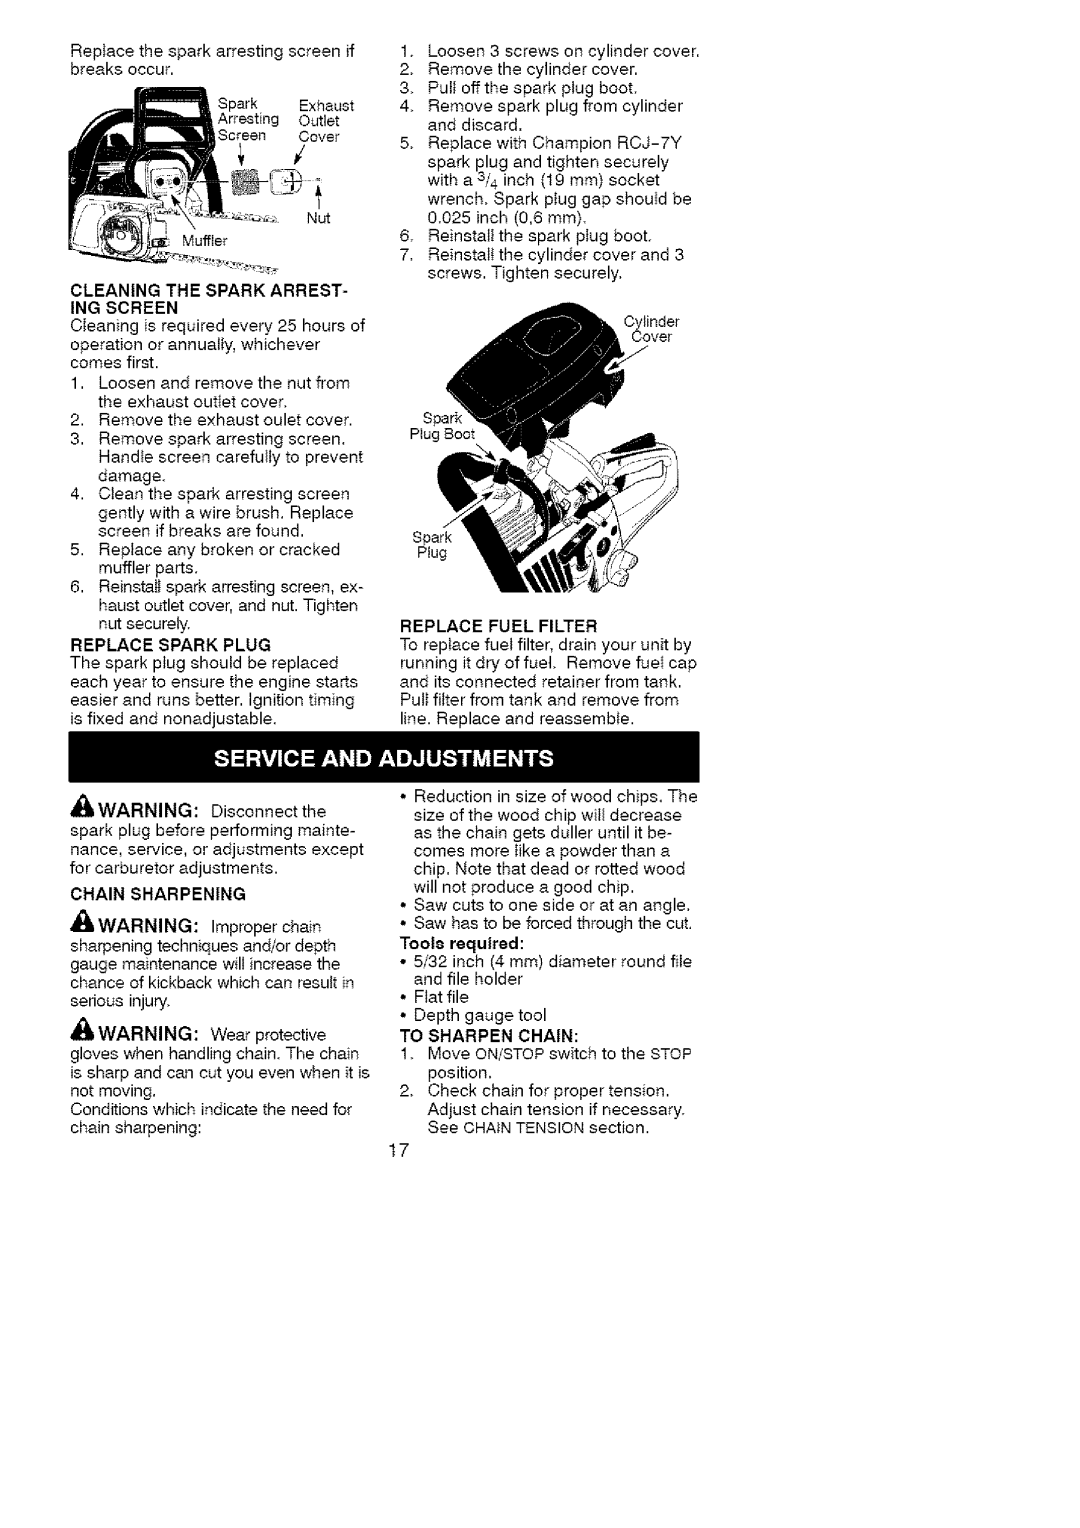 Craftsman 358.35161 manual Tool8 required 